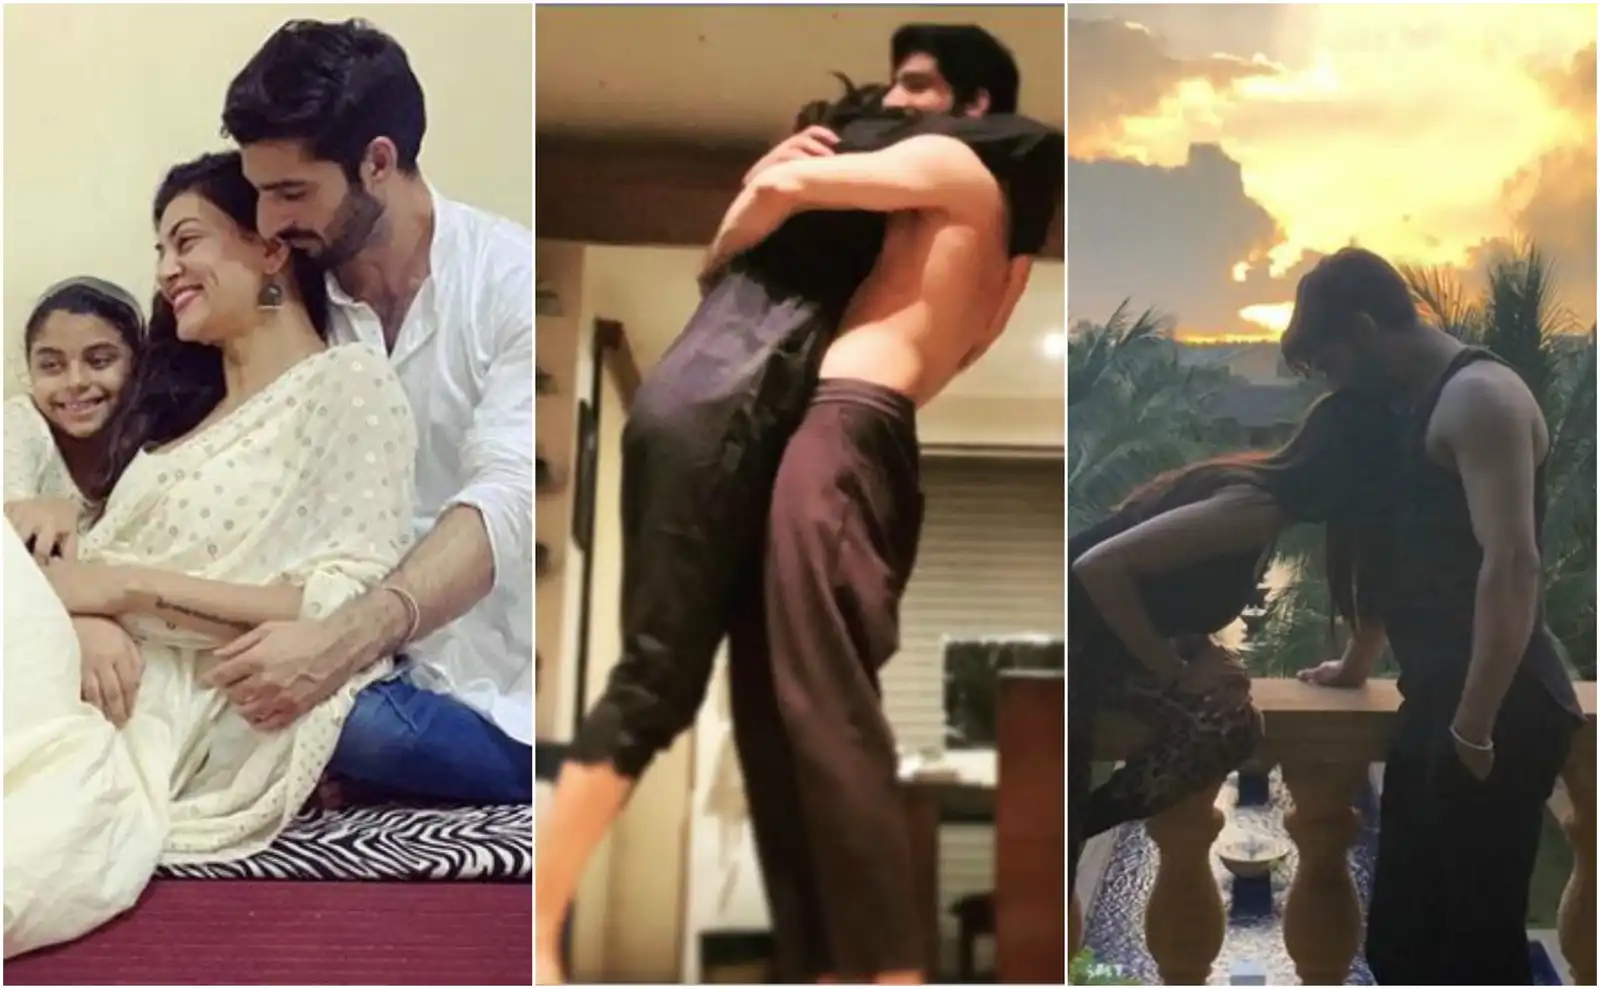 IN PICTURES: Sushmita Sen And Rohman Shawl's Online PDA Is Surely Going To Make Singles Weep